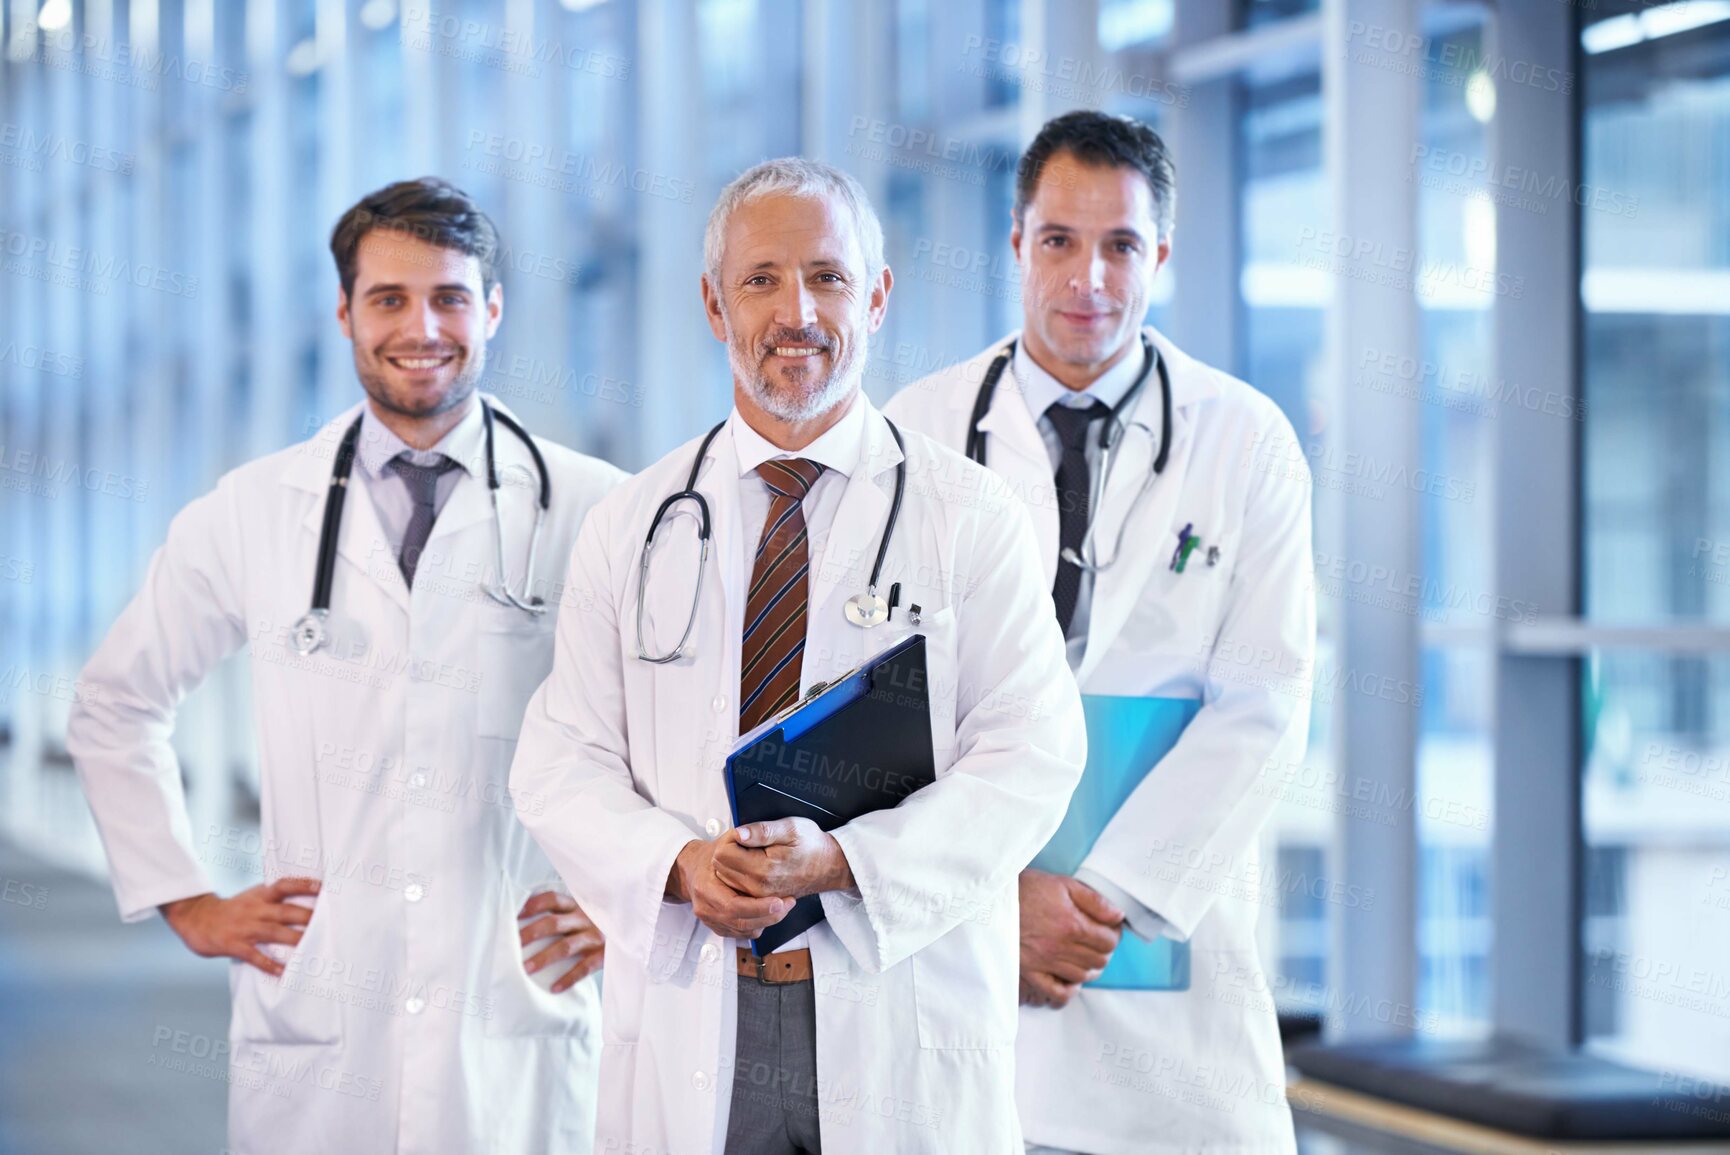 Buy stock photo A medical team standing in the hospital corridor